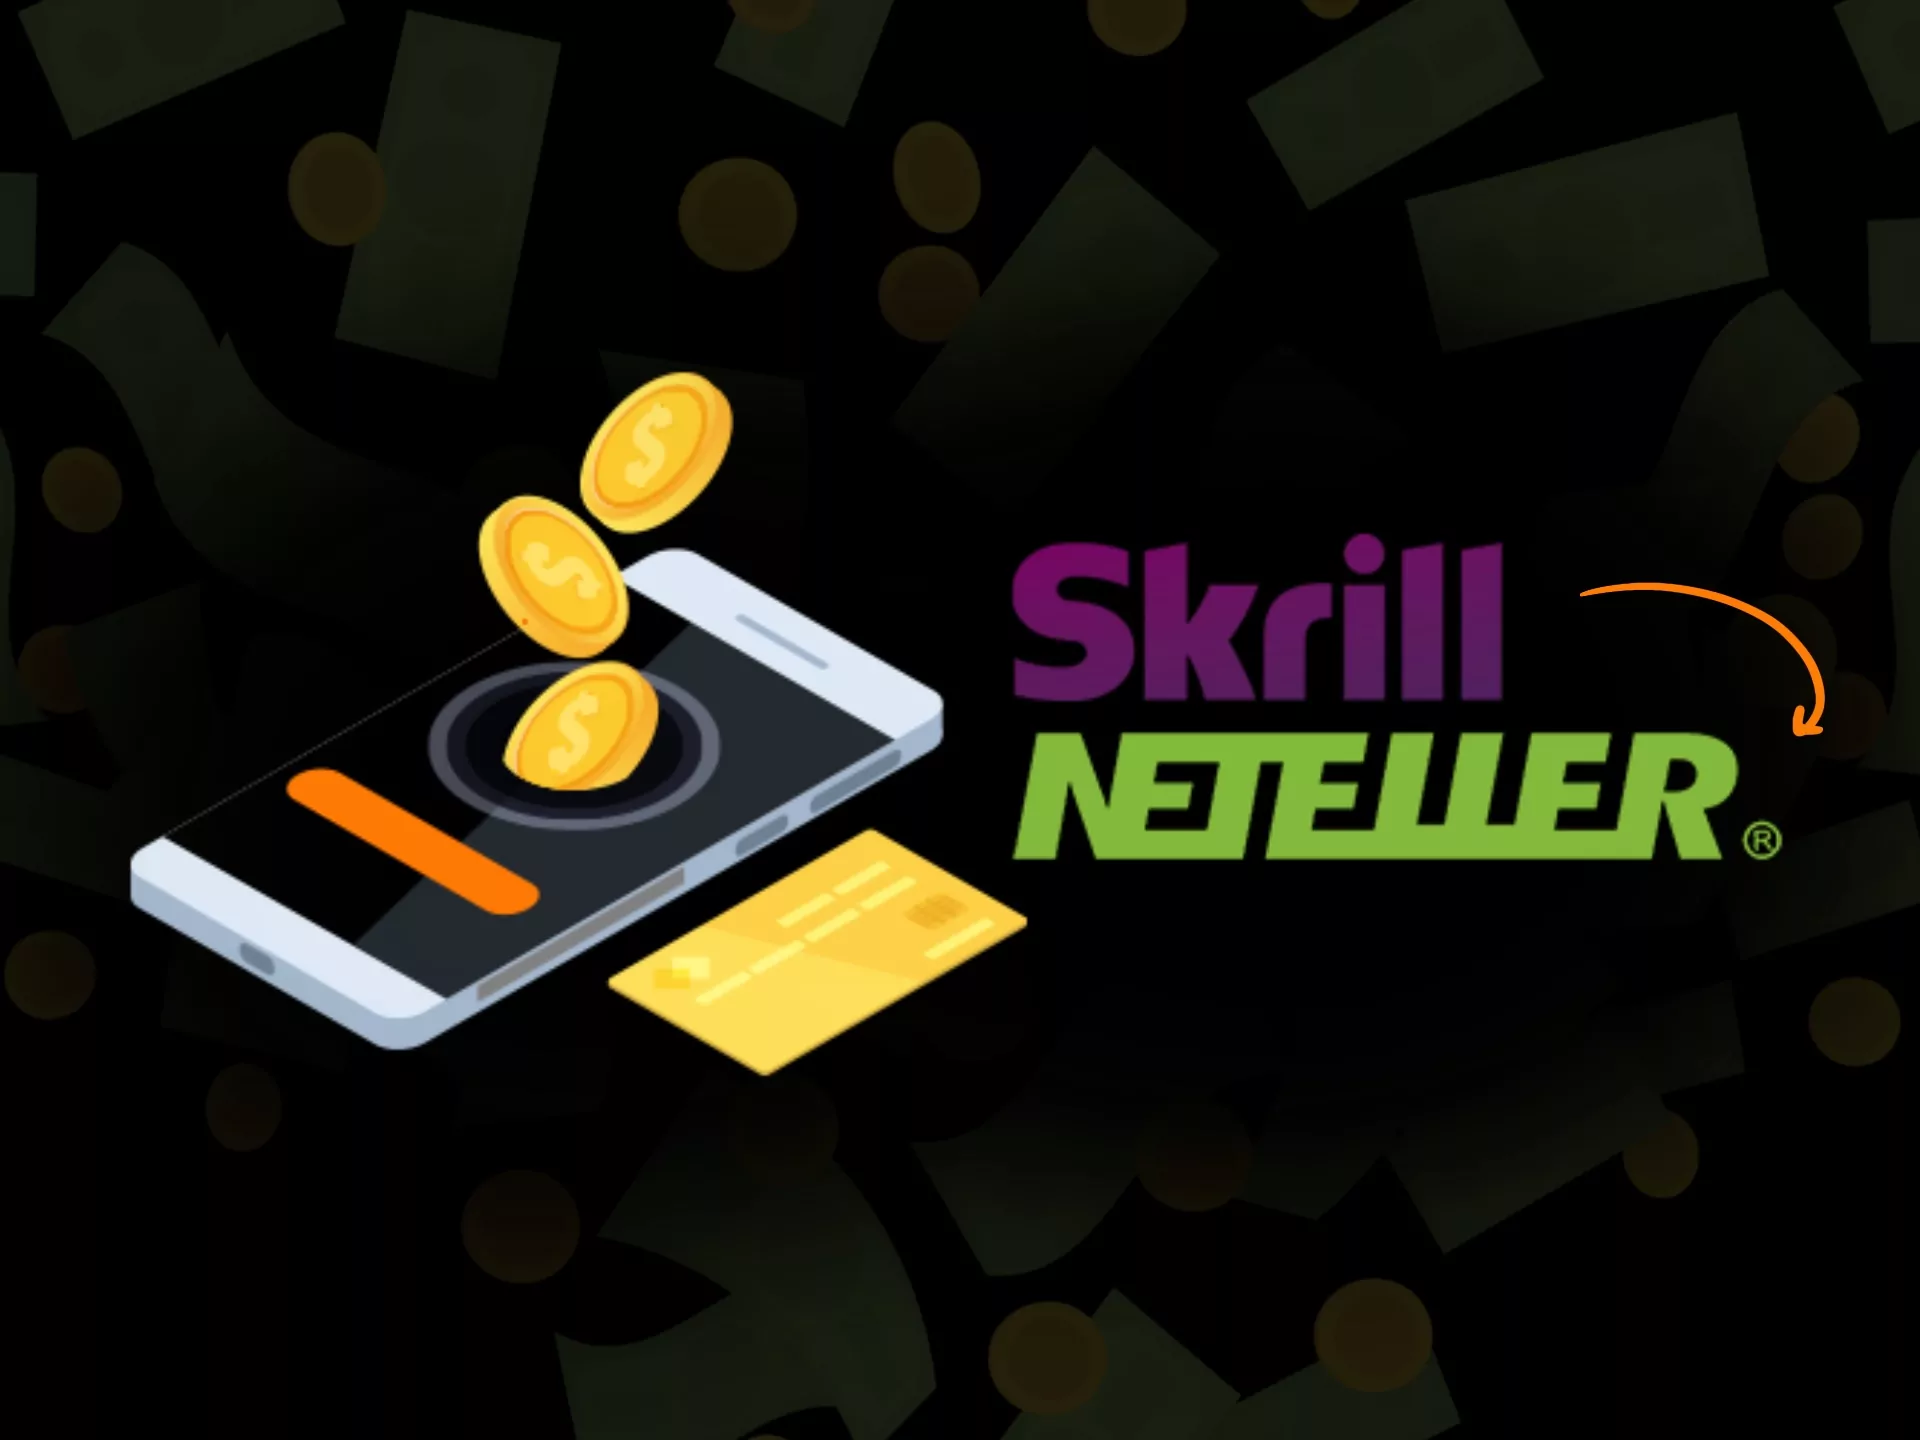 Skrill and Neteller are bound by one company so you can easily transfer money between them.